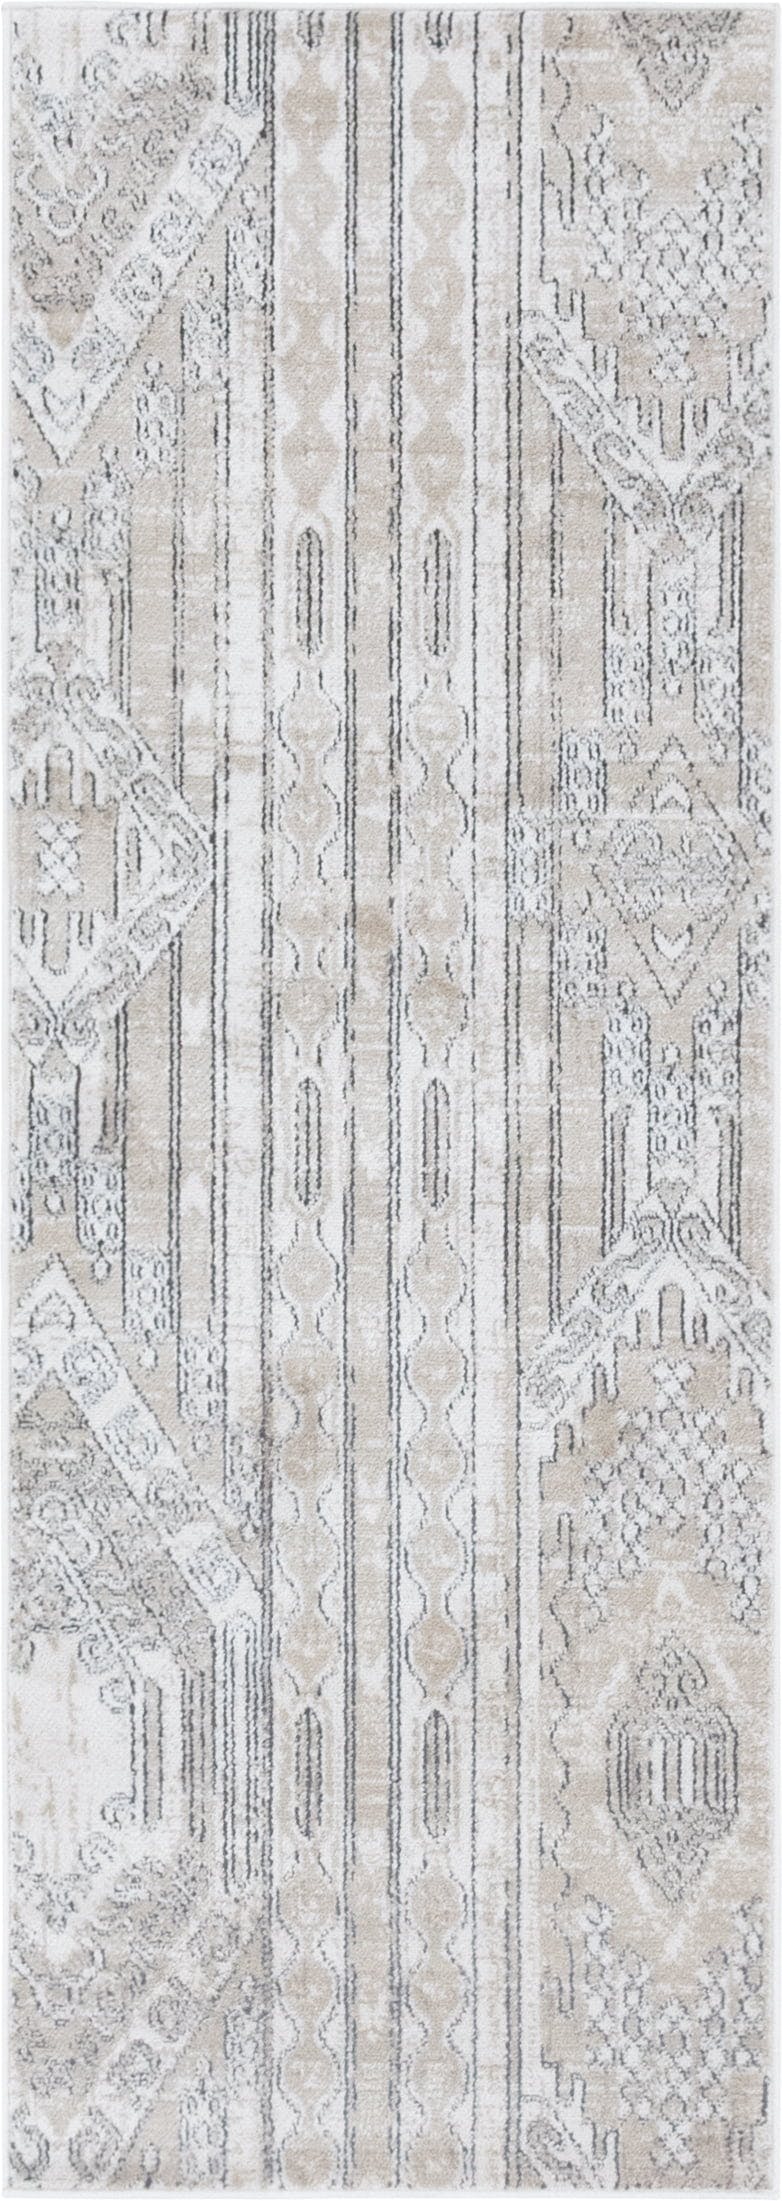 Ivory and Tan Geometric Indoor Runner Rug 2' 2" x 6' 1"